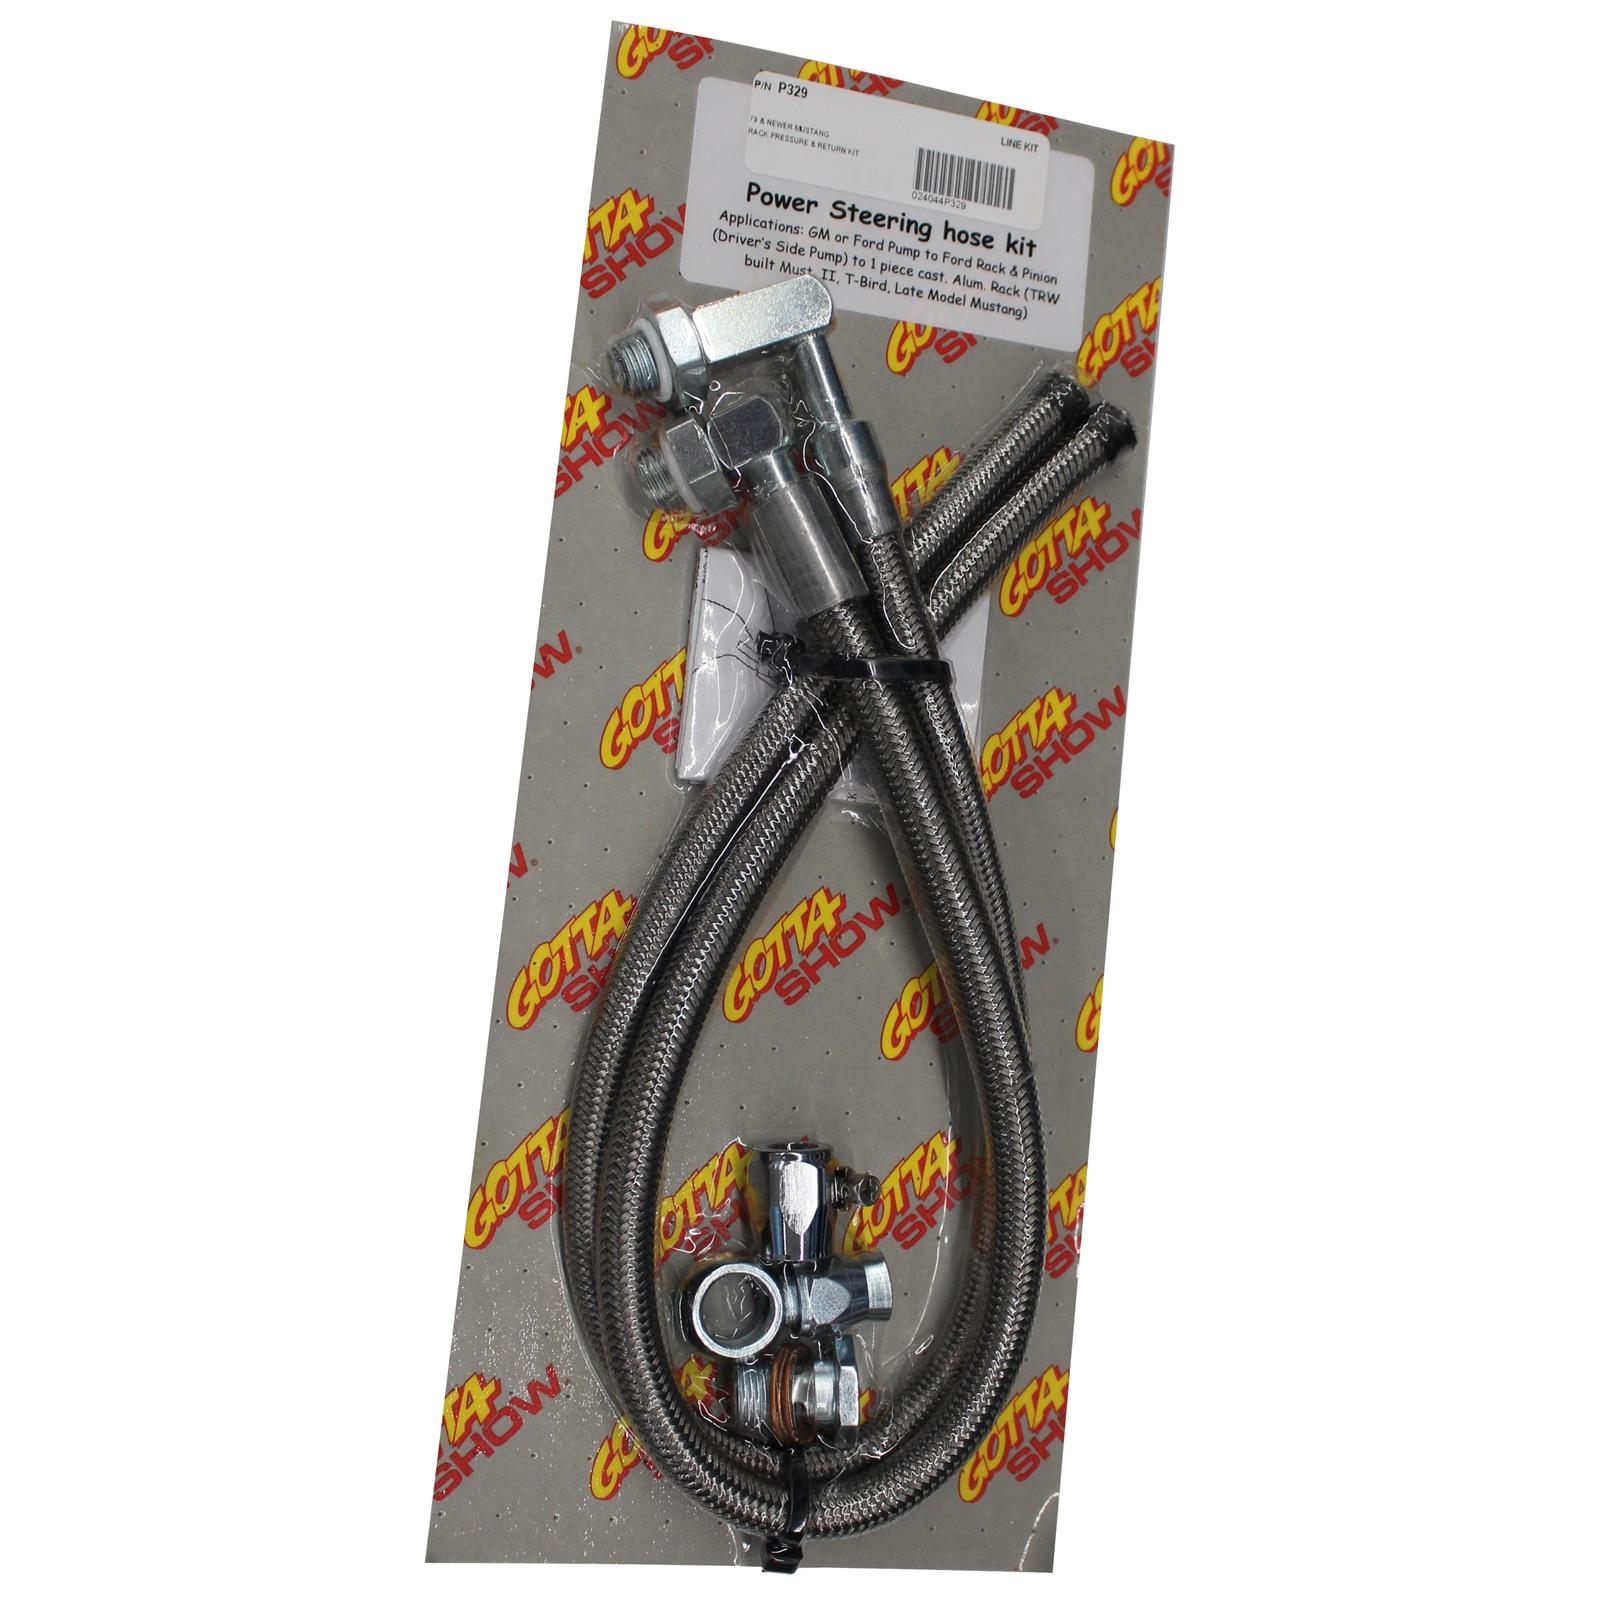 March Performance Braided Power Steering Hose Kits P329